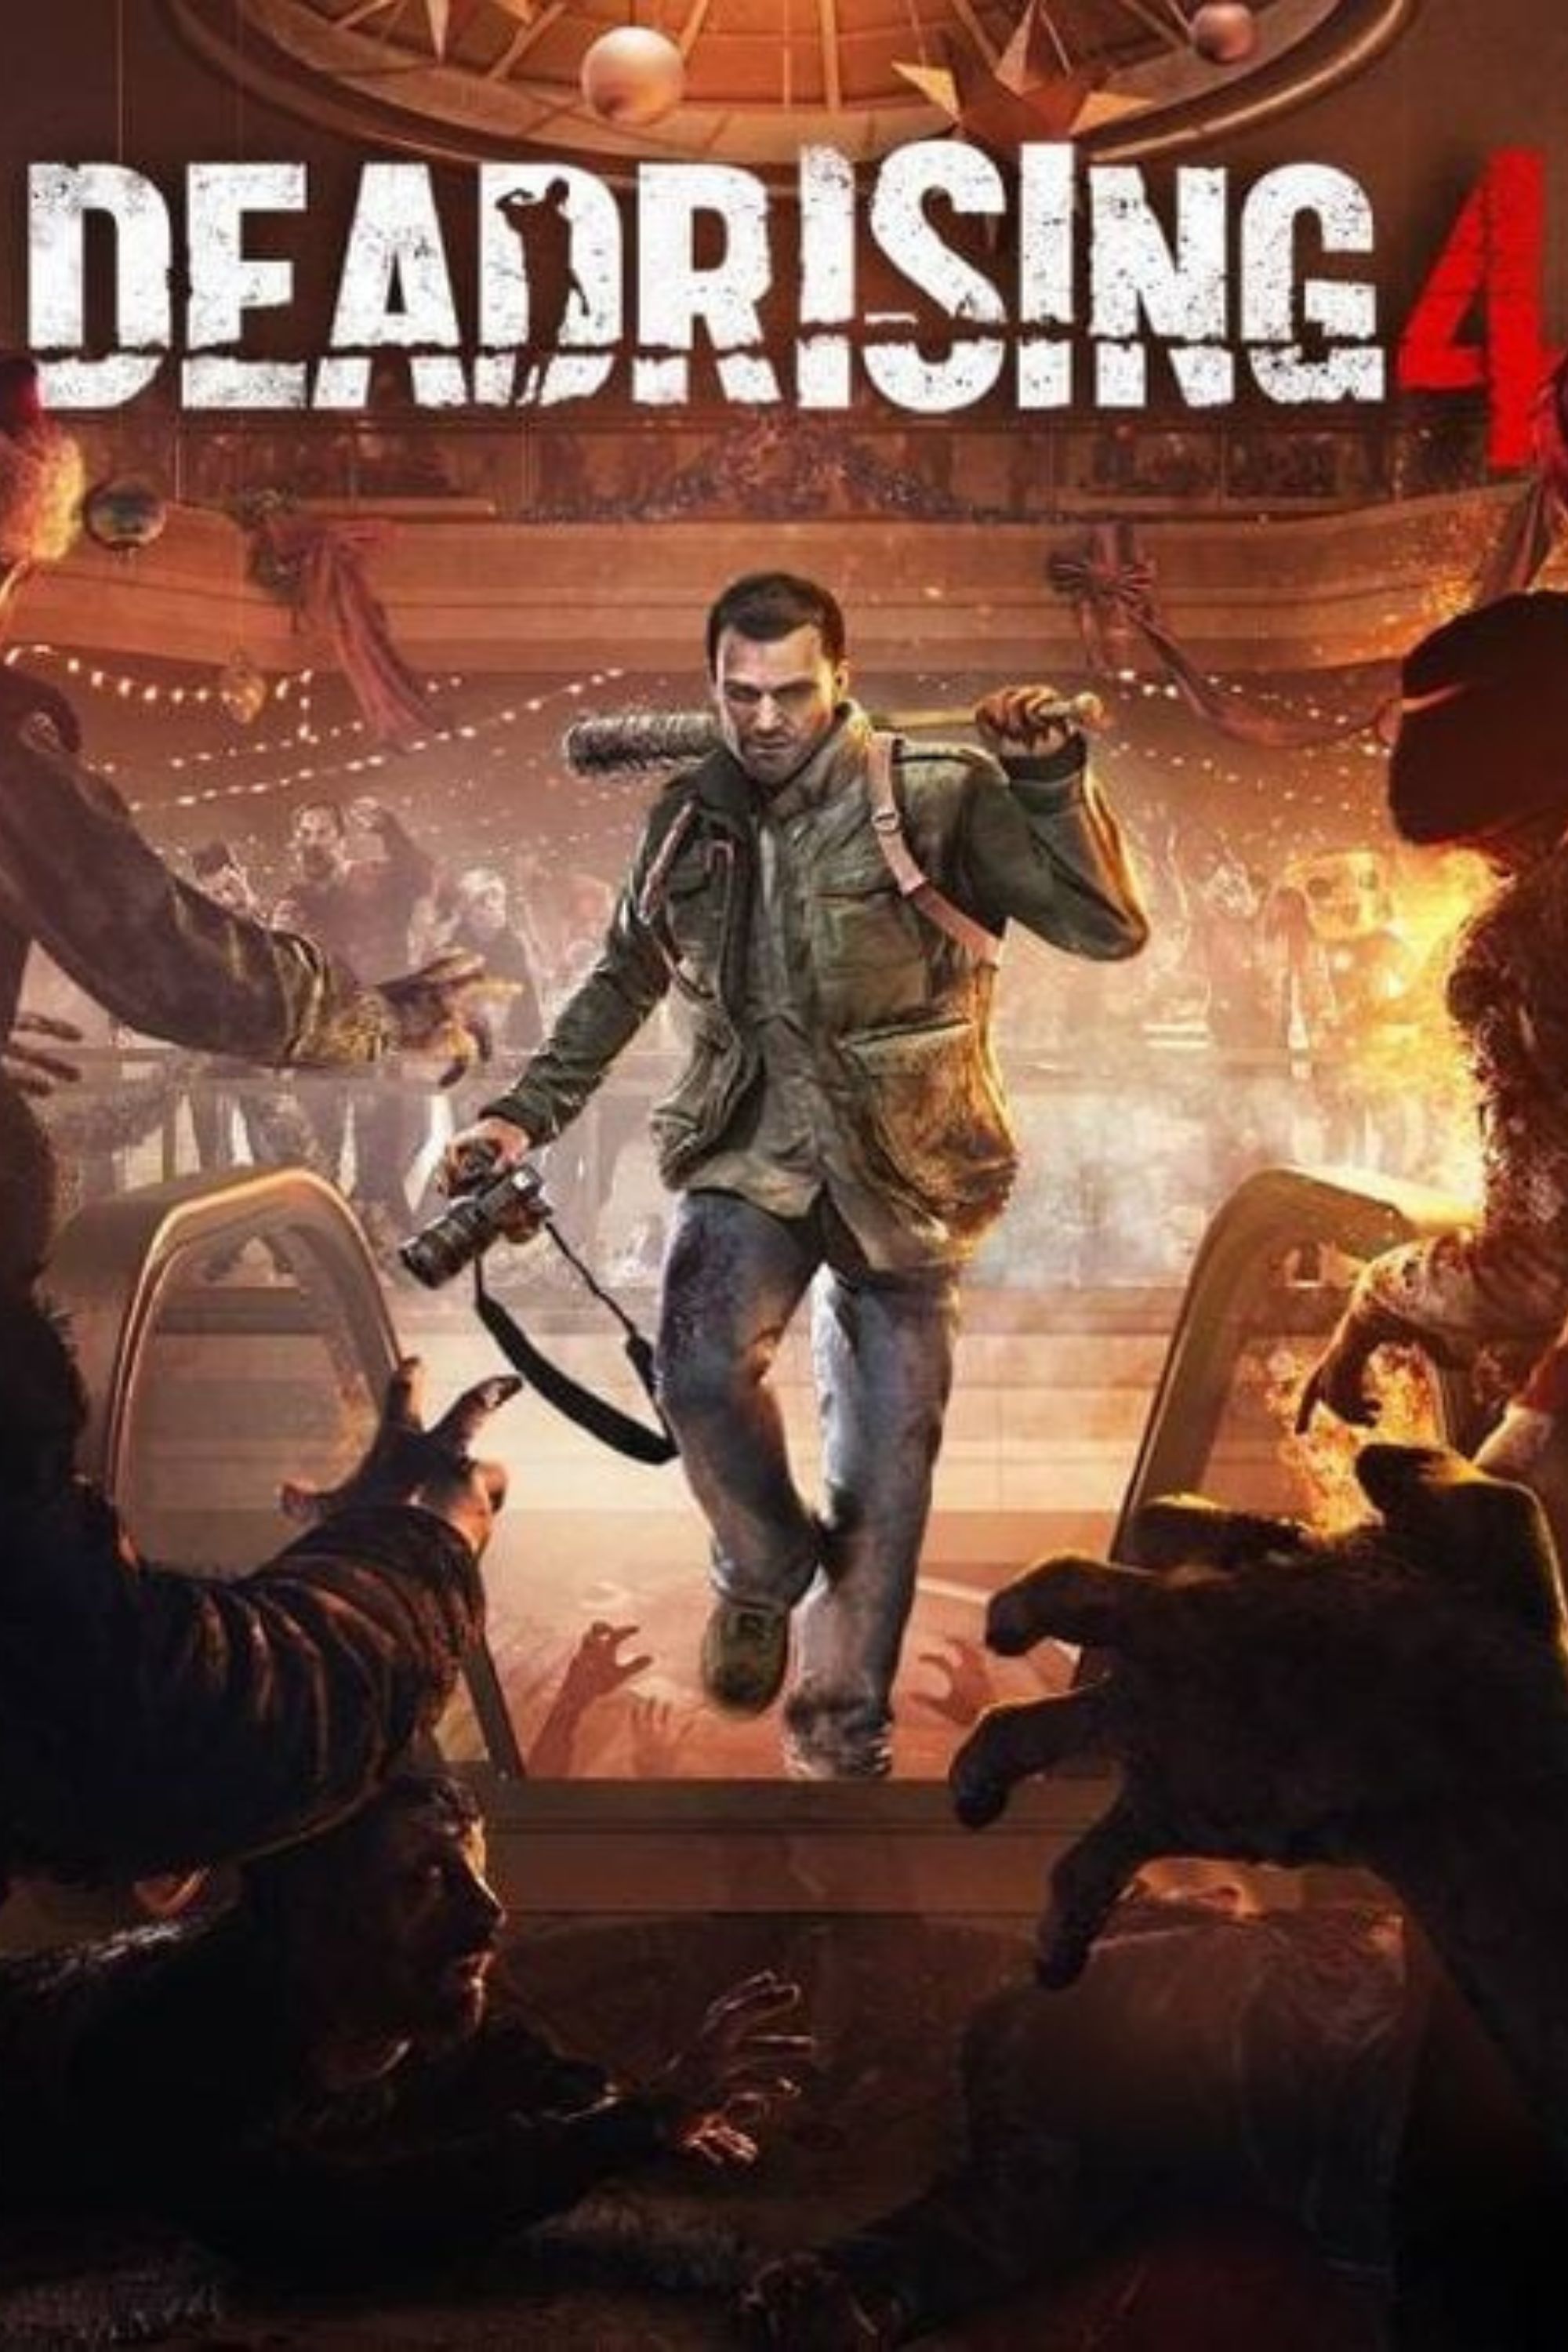 Product cover for Dead Rising 4 featuring the protagonist holding a baseball bat and camera in front of zombies